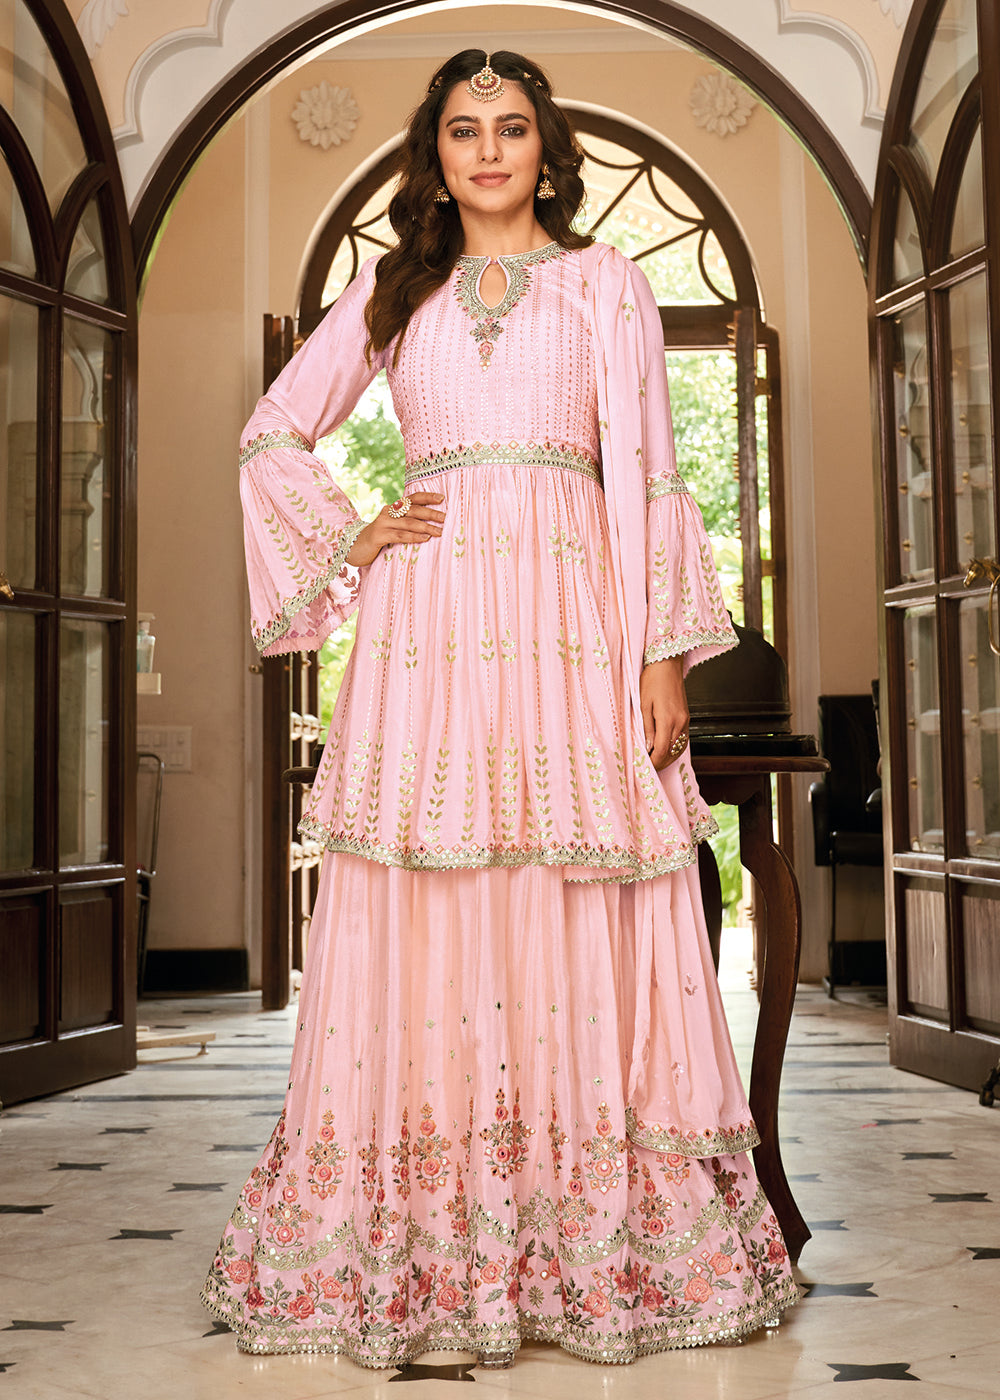 Buy Now Sharara Top Style Pink Heavy Chinon Lehenga Skirt Suit Online in USA, UK, Canada & Worldwide at Empress Clothing.